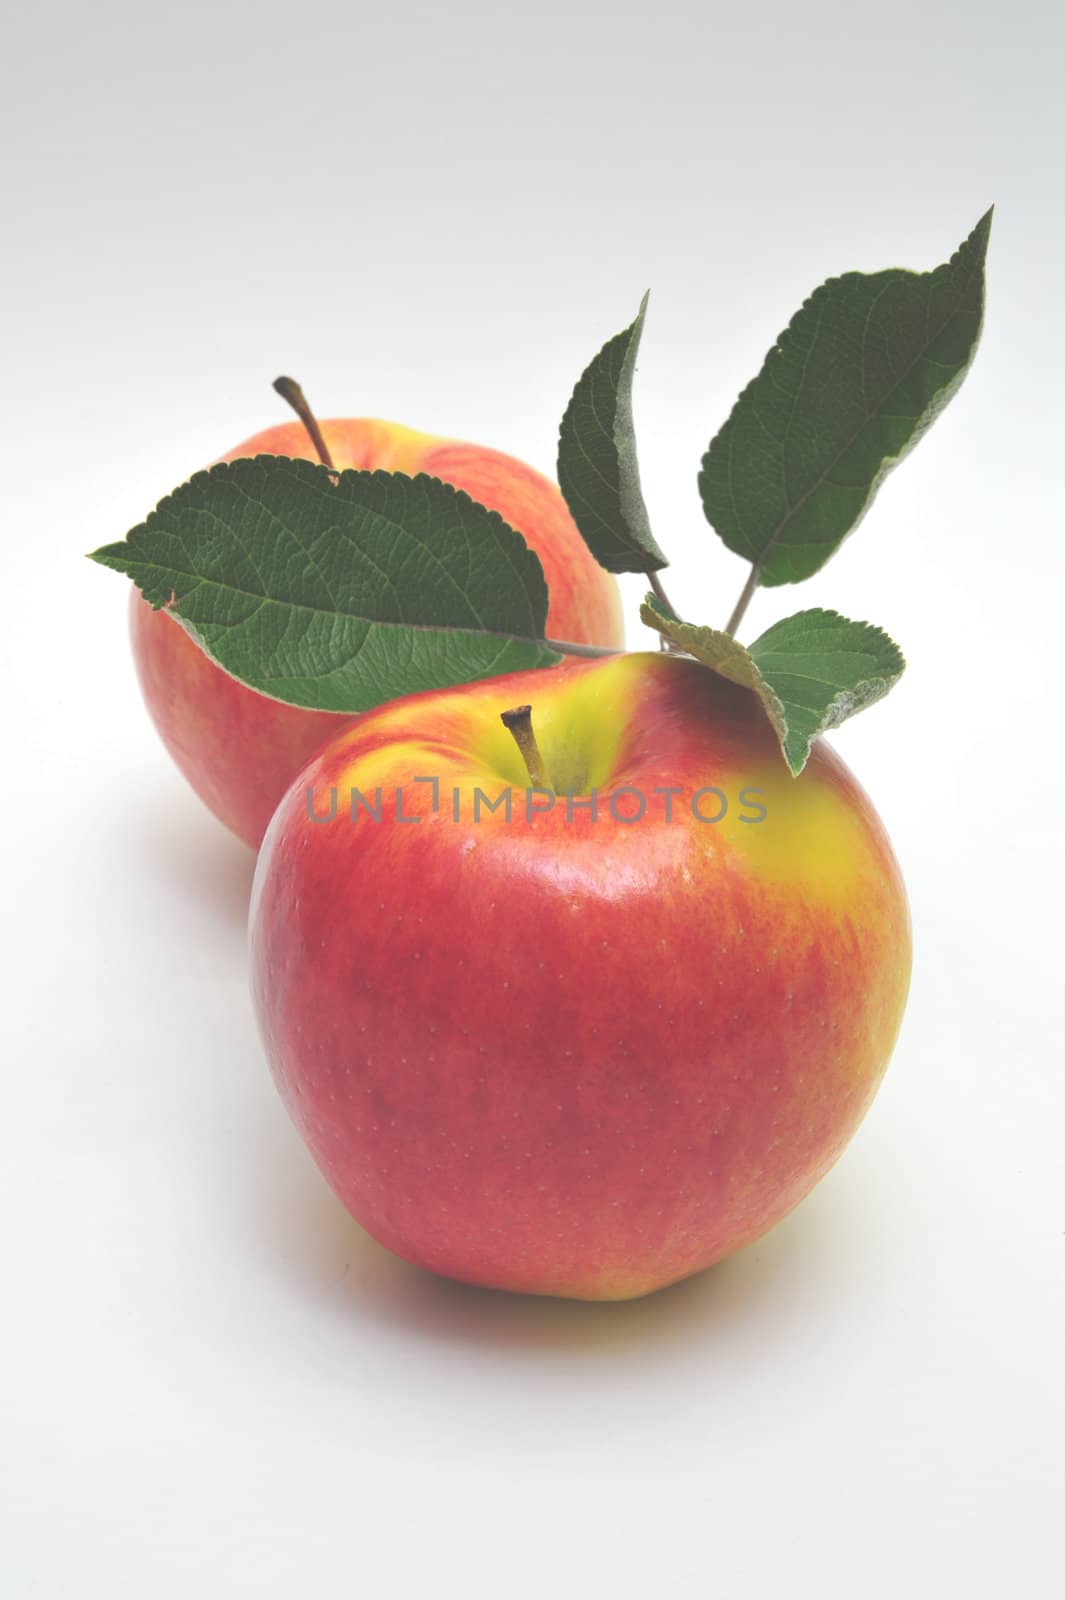 Two colorful apples and leaves on a light colored background